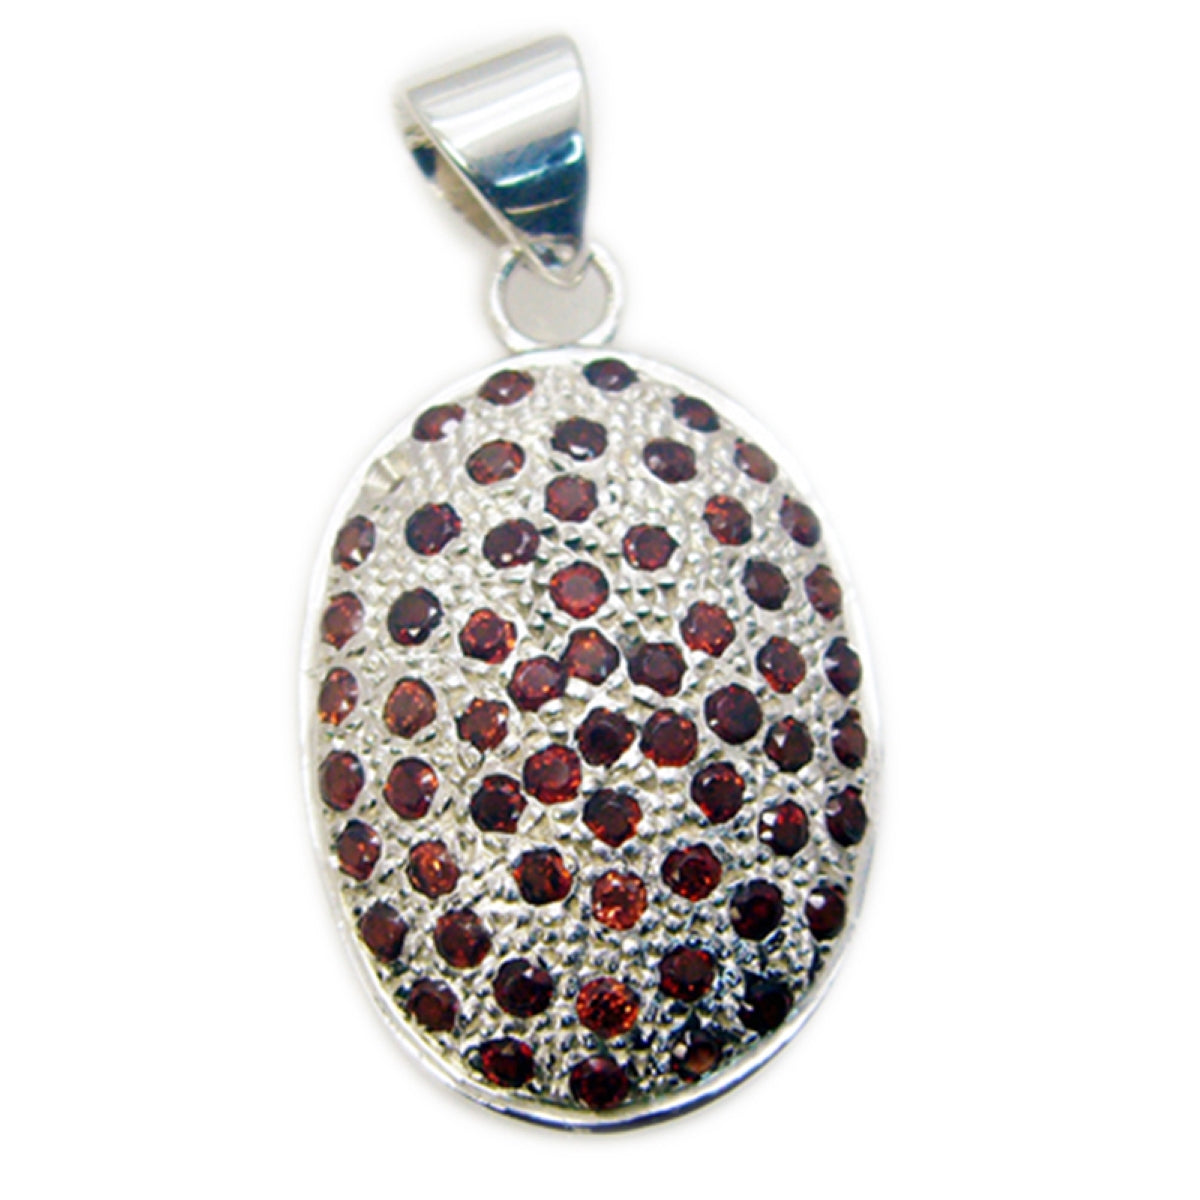 Riyo Natural Gemstone Round Faceted Red Garnet 925 Sterling Silver Pendant gift for independence